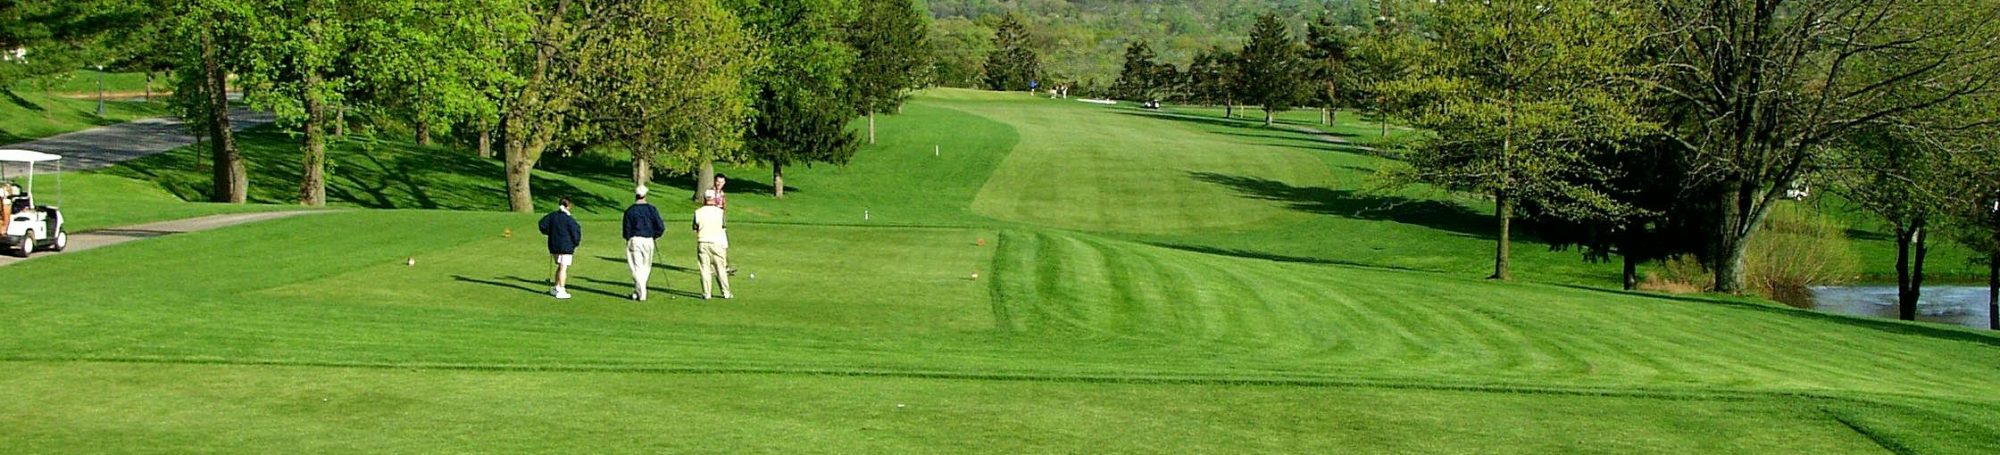 Open fairway with golfers on the left